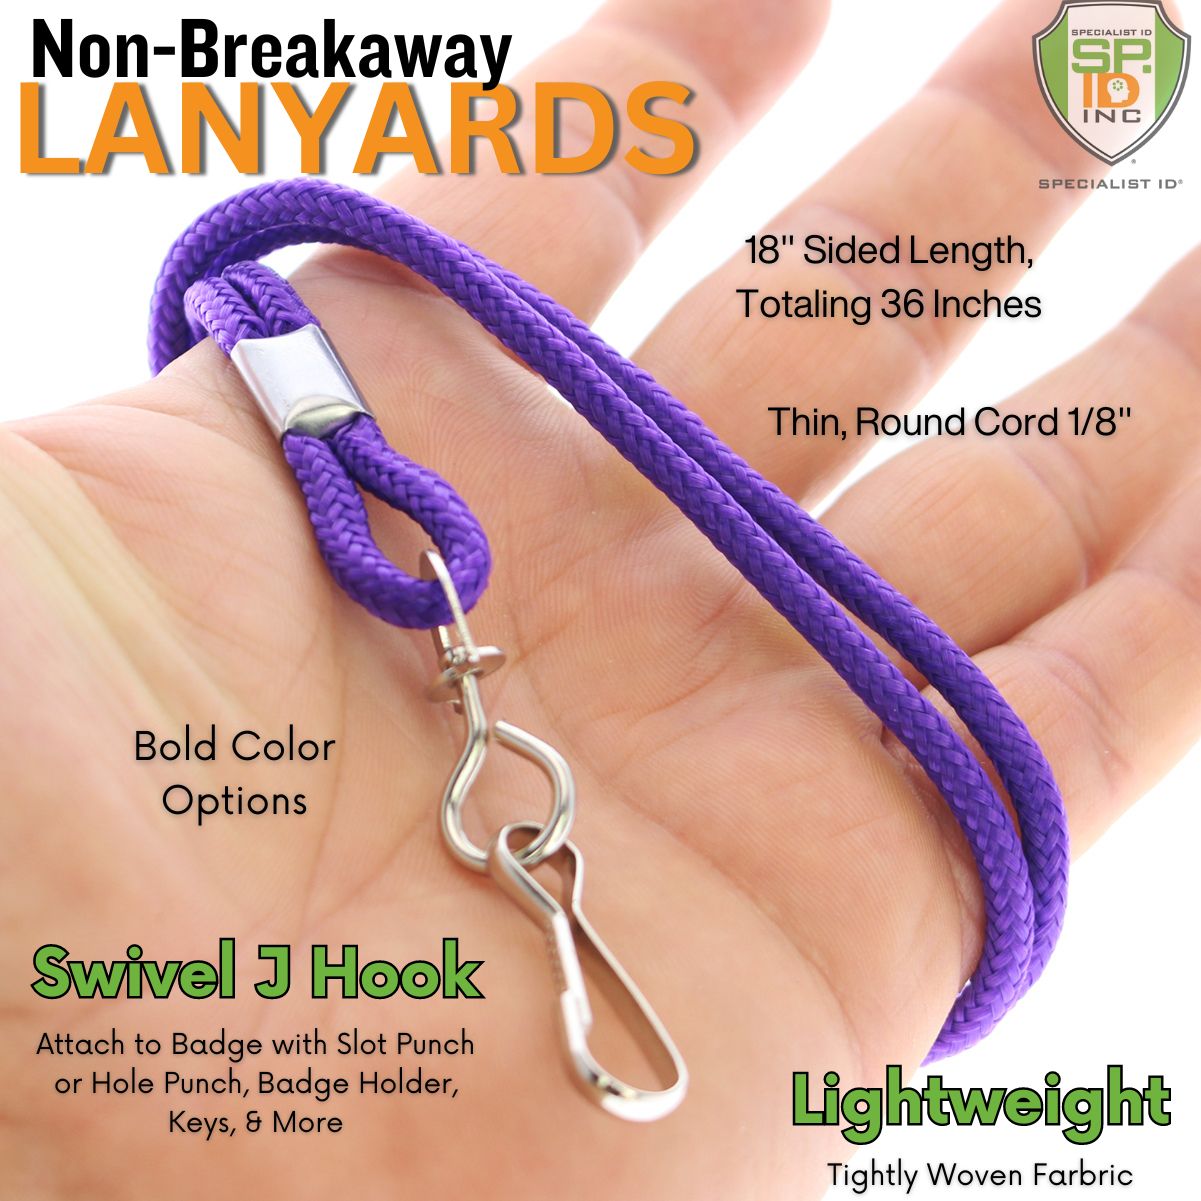 Image of the Standard Non-Breakaway Round Lanyard with a Metal Swivel Hook (2135-300X) in purple. Text highlights features: "18" Side Length, Totaling 36 Inches," "Thin, Round Braided Cord 1/8"," "Bold Color Options," and "Lightweight, Tightly Woven Fabric.